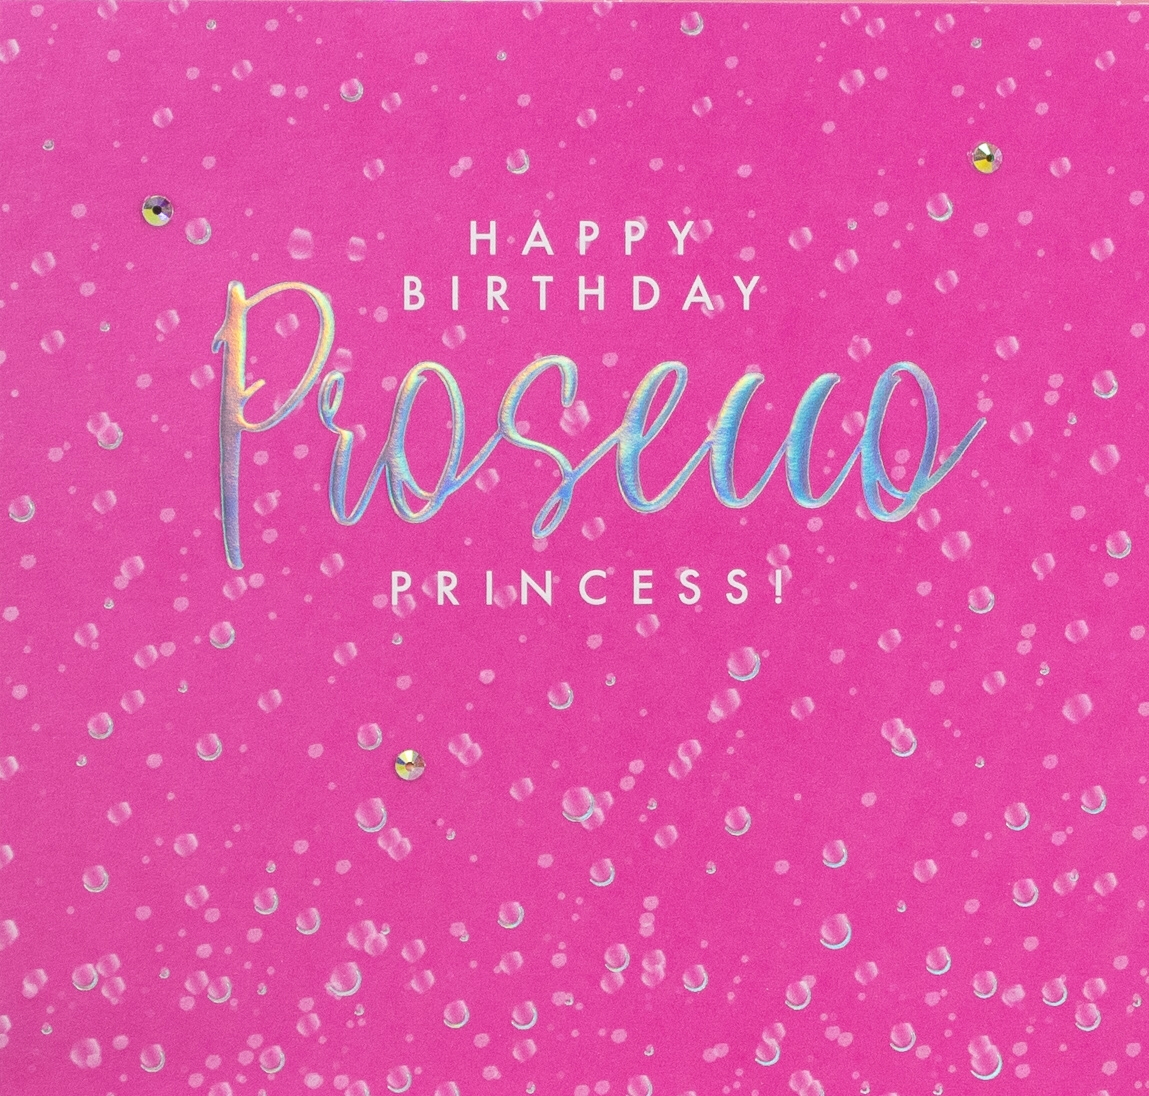 The Handcrafted Card Company Prosecco Princess Pink Birthday Card